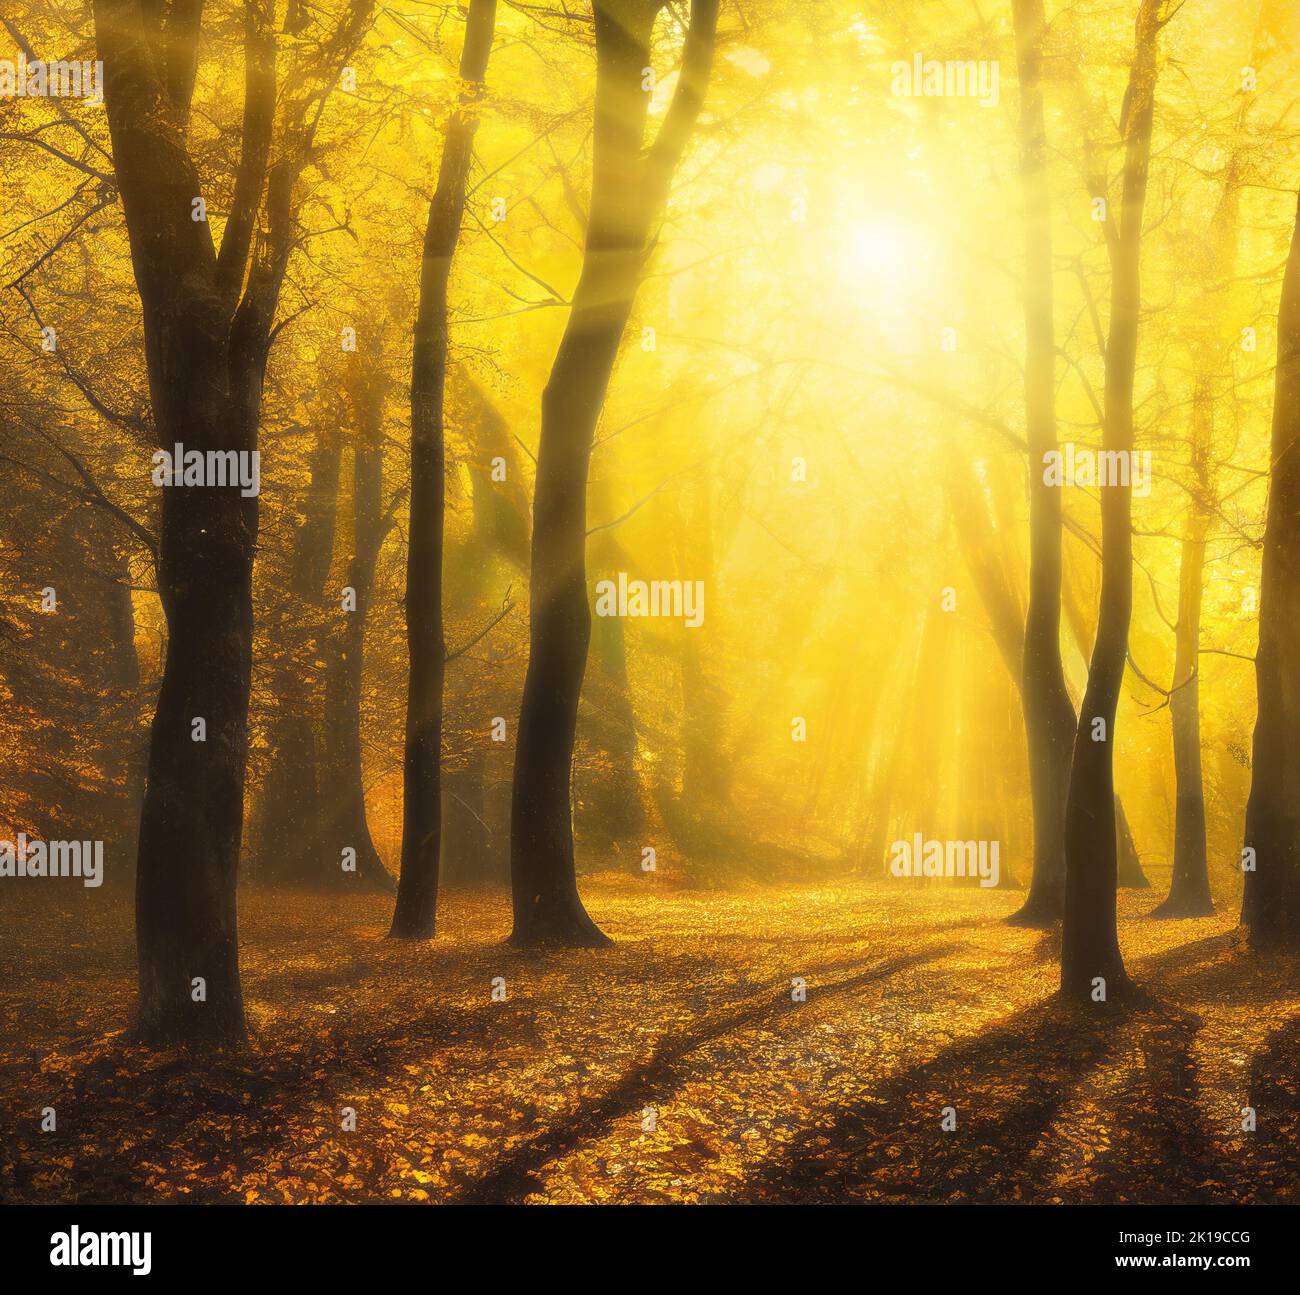 Enchanted autumn forest with bright golden sunshine through the trees and golden fog, square format. Digital illustration based on render by neural ne Stock Photo